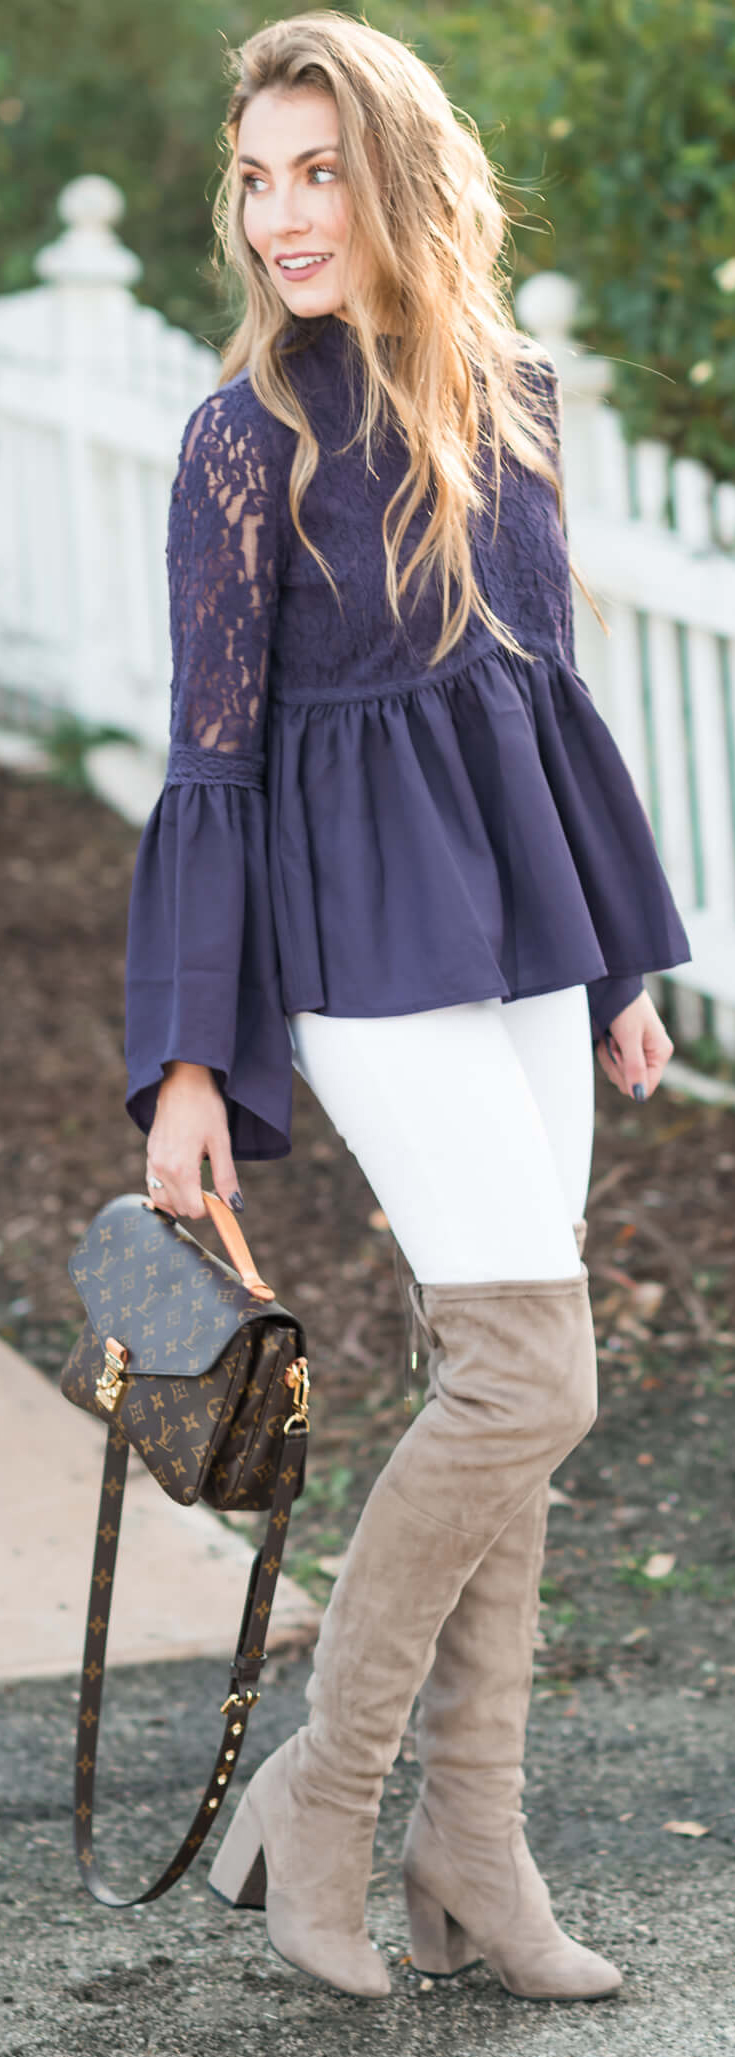 Winter Outfit I love: Blue Lace Peplum top, White Skinny Jeans, Steve Madden Over the knee boots, and Louis Vuitton Pochette Metis. Angela Lanter - Hello Gorgeous.